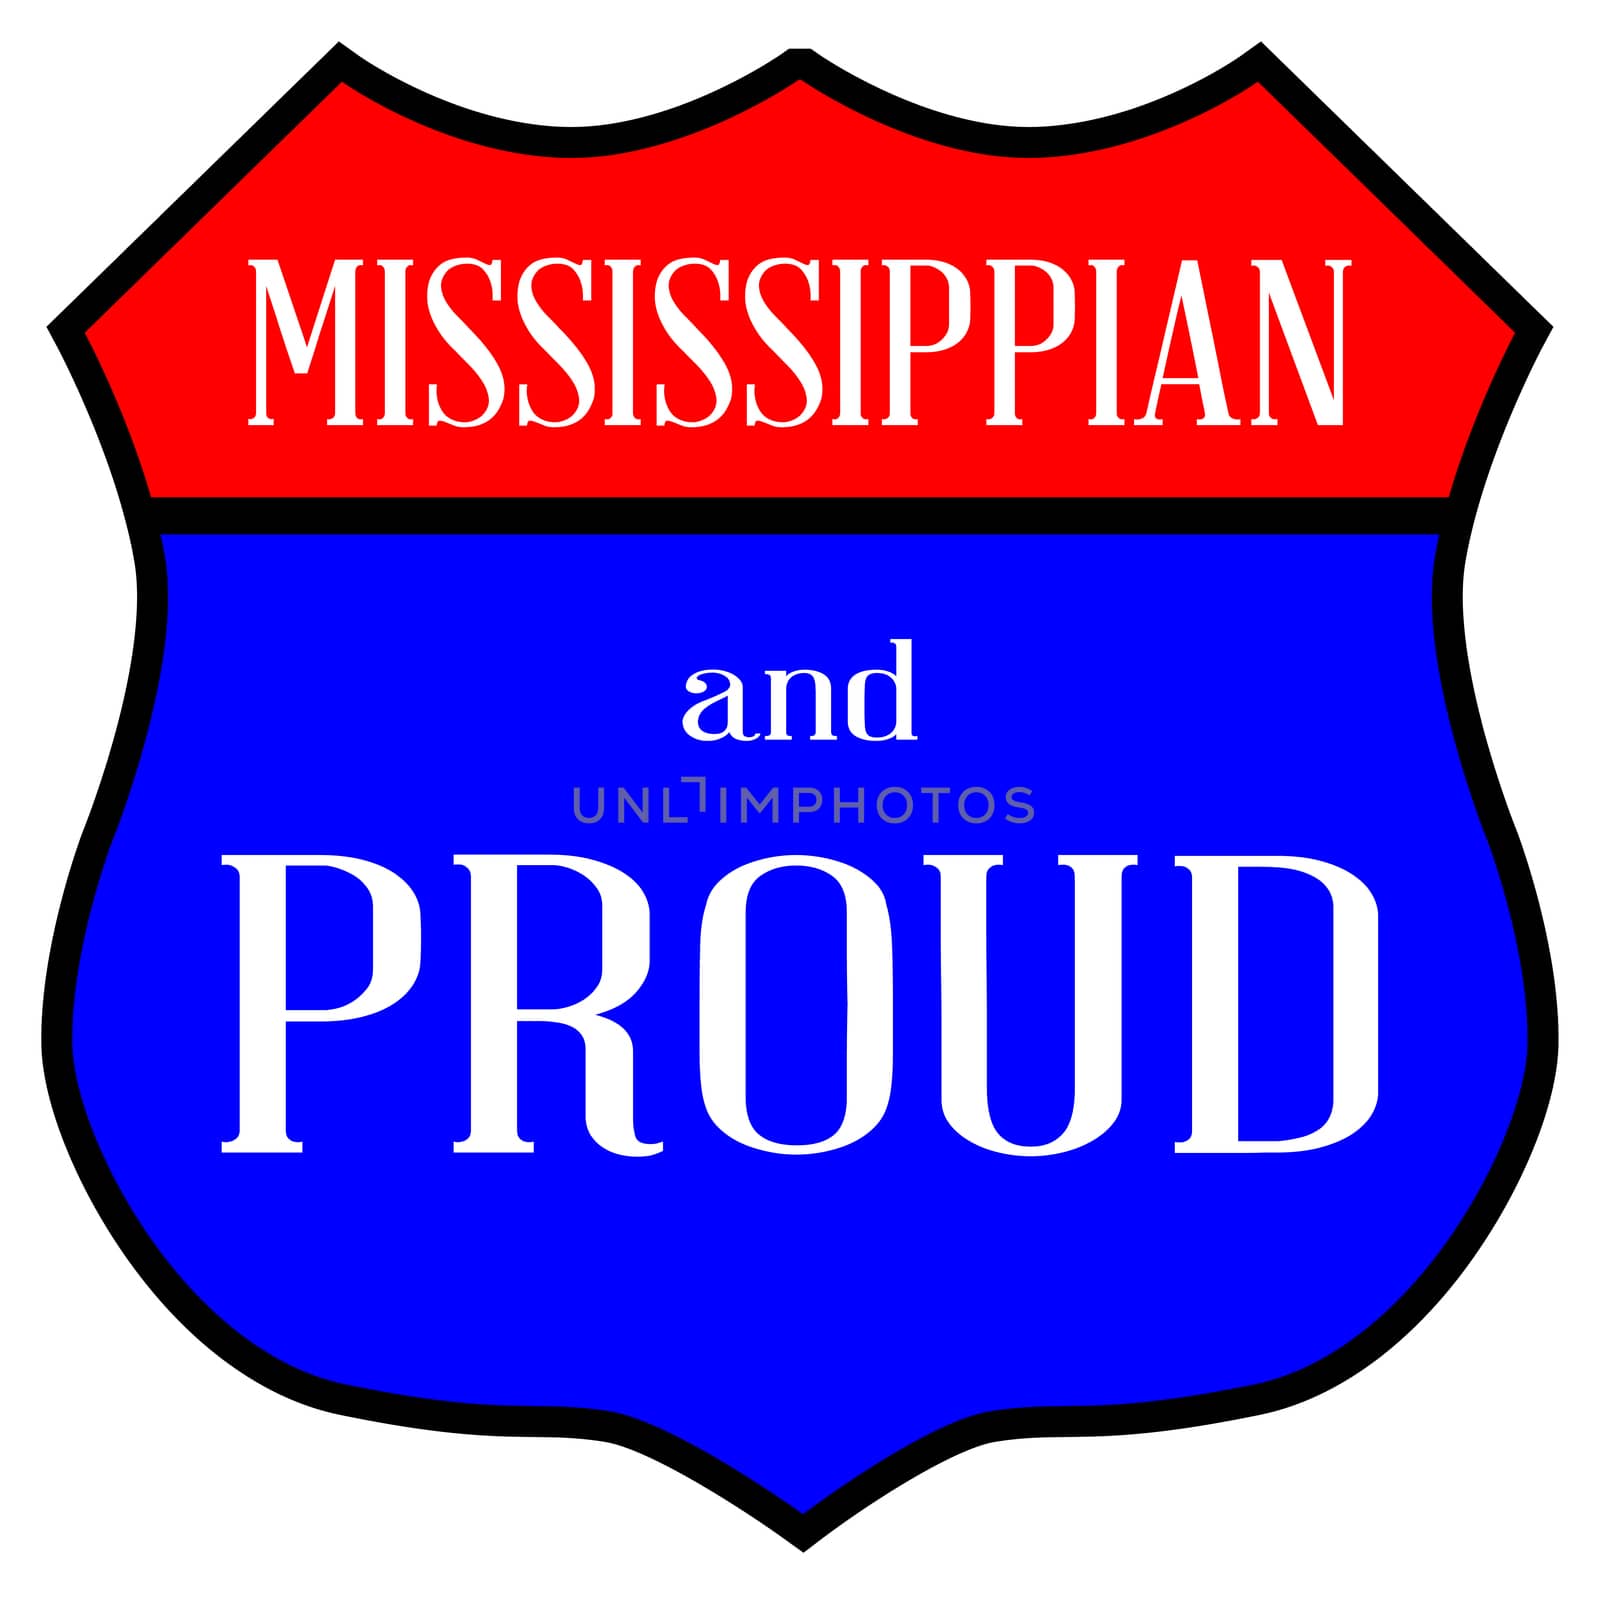 Mississippian And Proud by Bigalbaloo